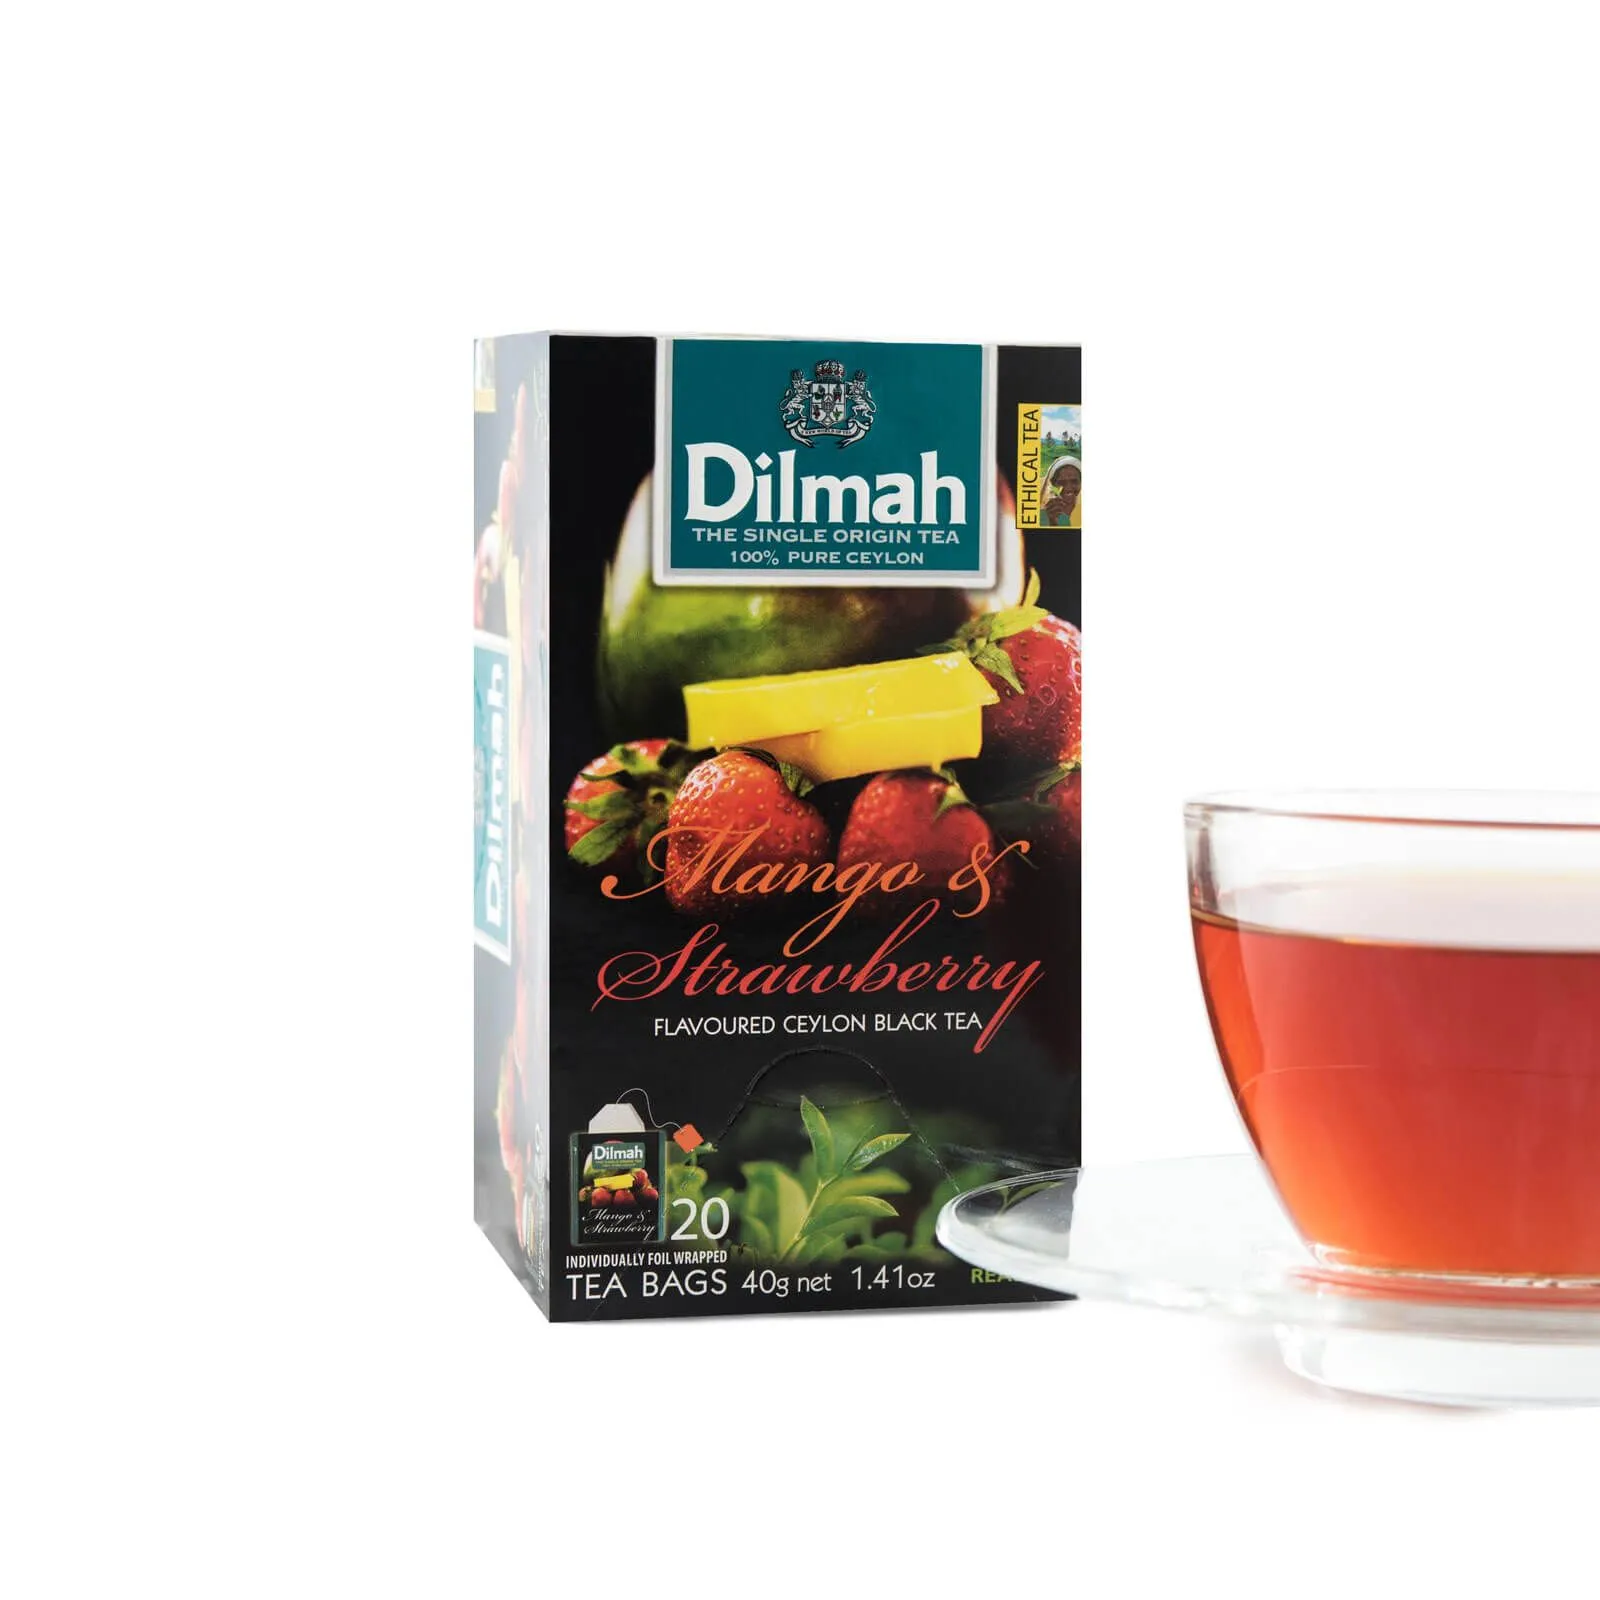 Pack of 20 individually wrapped tea bags of Mango & Strawberry black tea and a cup of tea